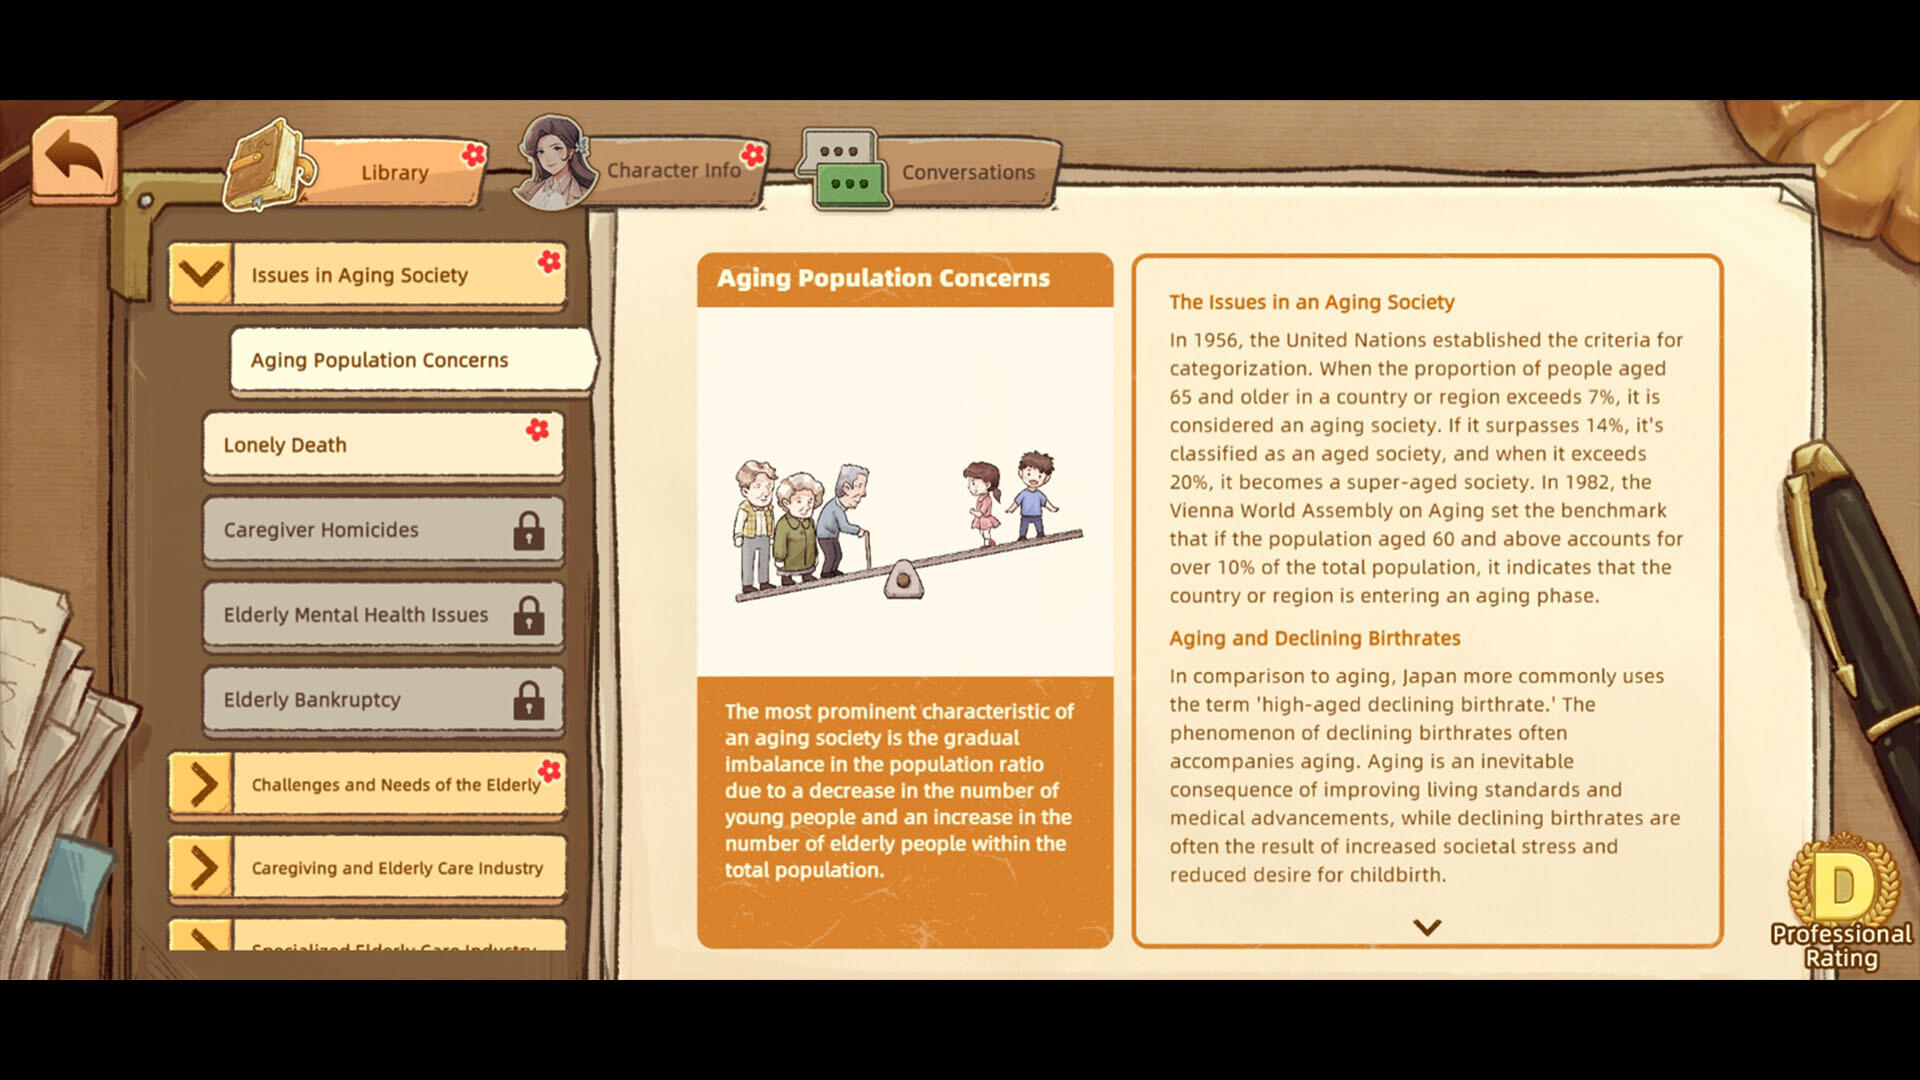 Screenshot of New life of Aged Town